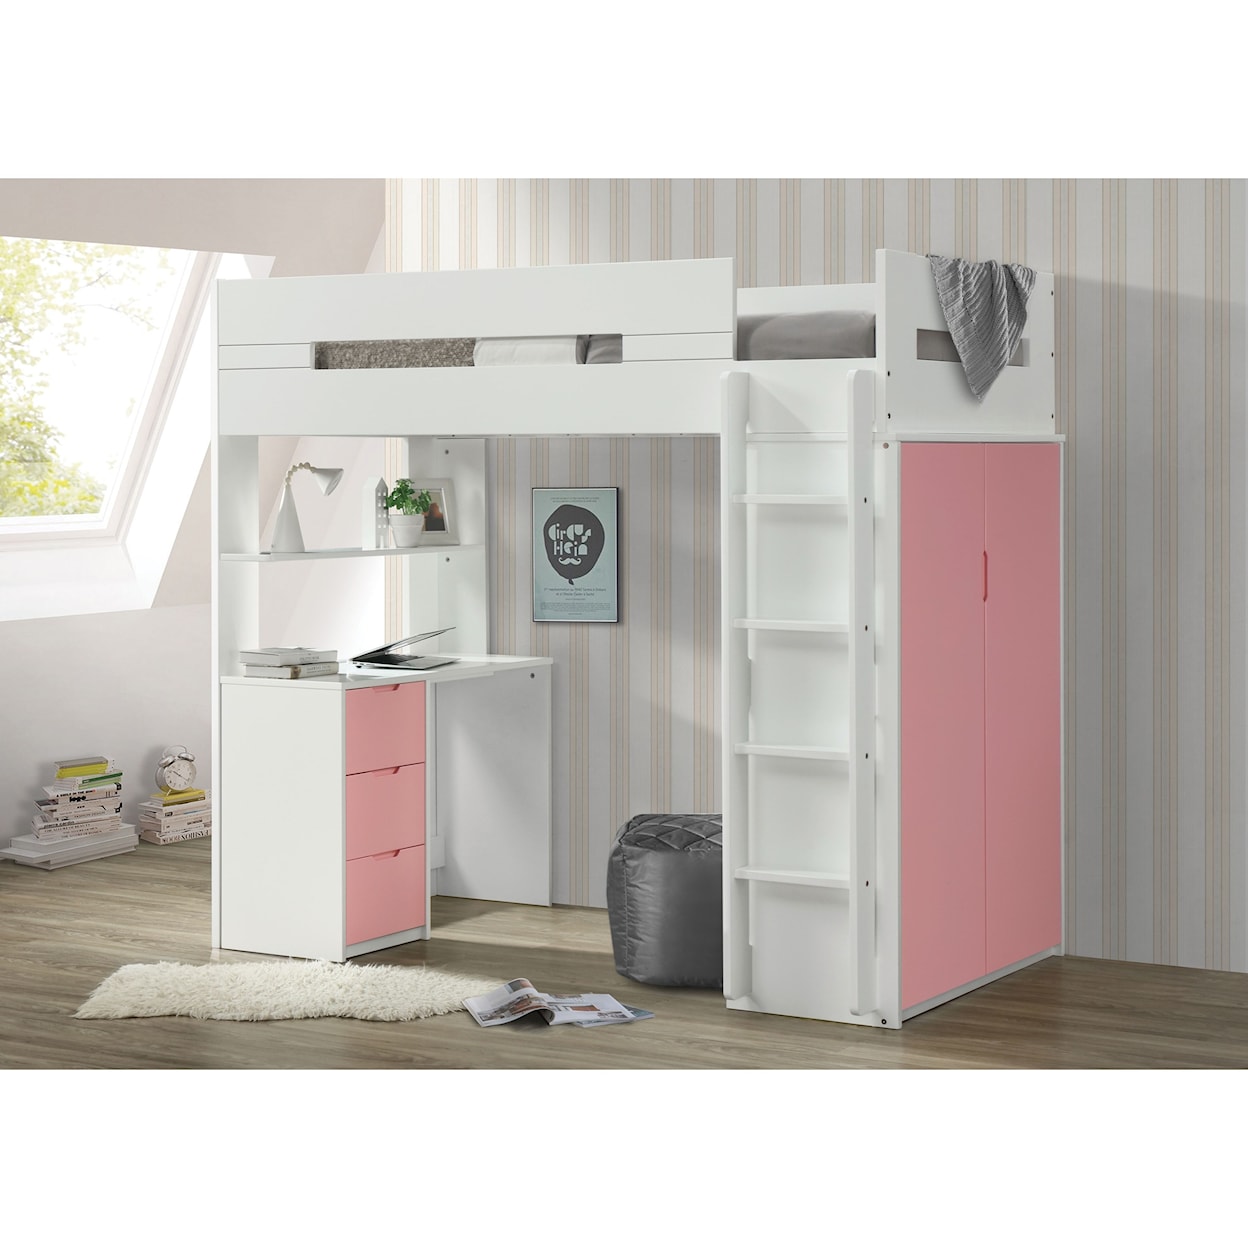 Acme Furniture Nerice Twin Loft Bed